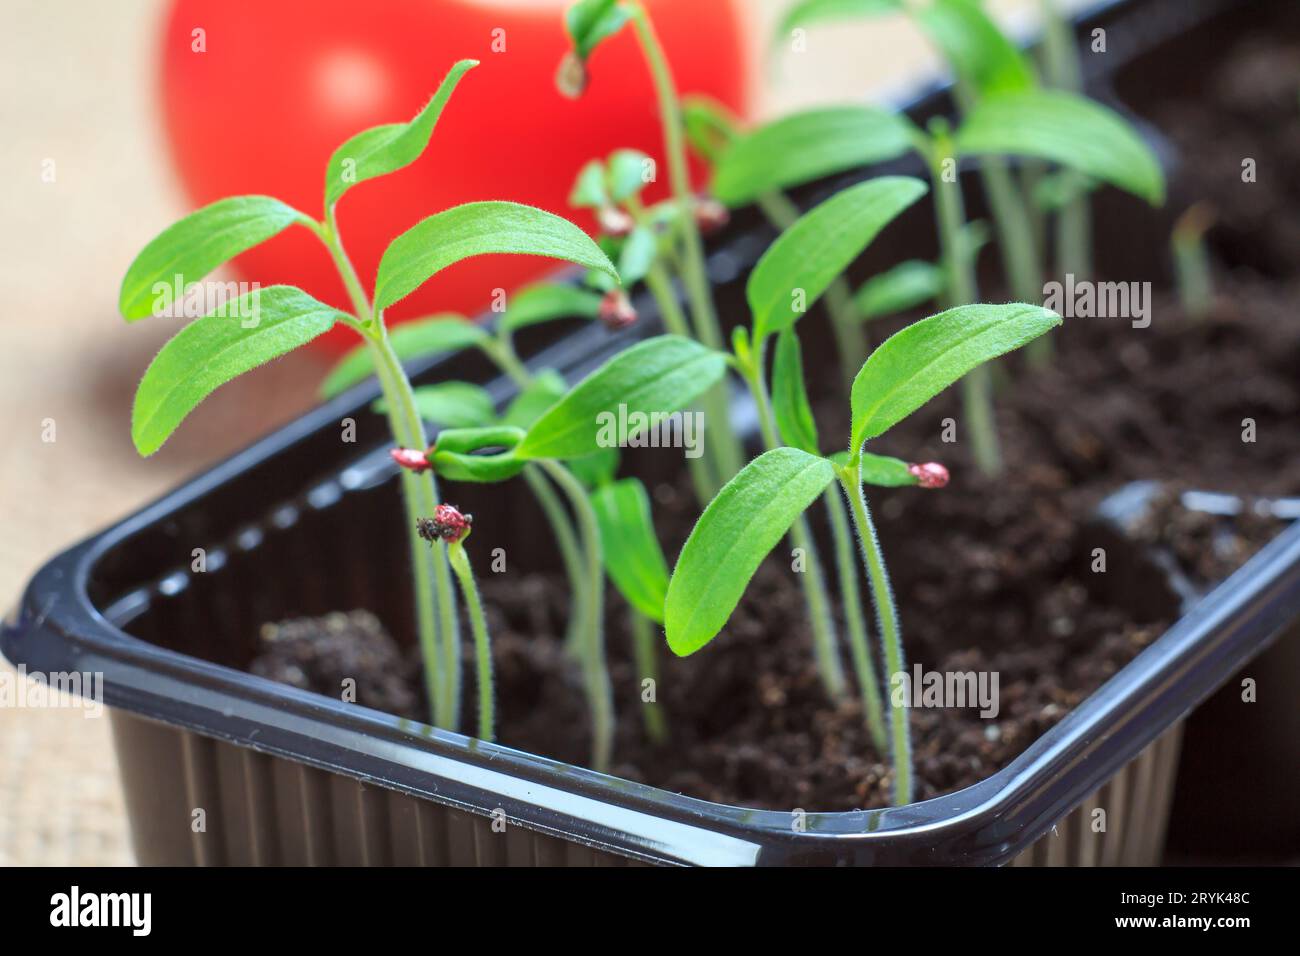 Young seedlings of tomatoes with the ripe red tomato on the background. Stock Photo